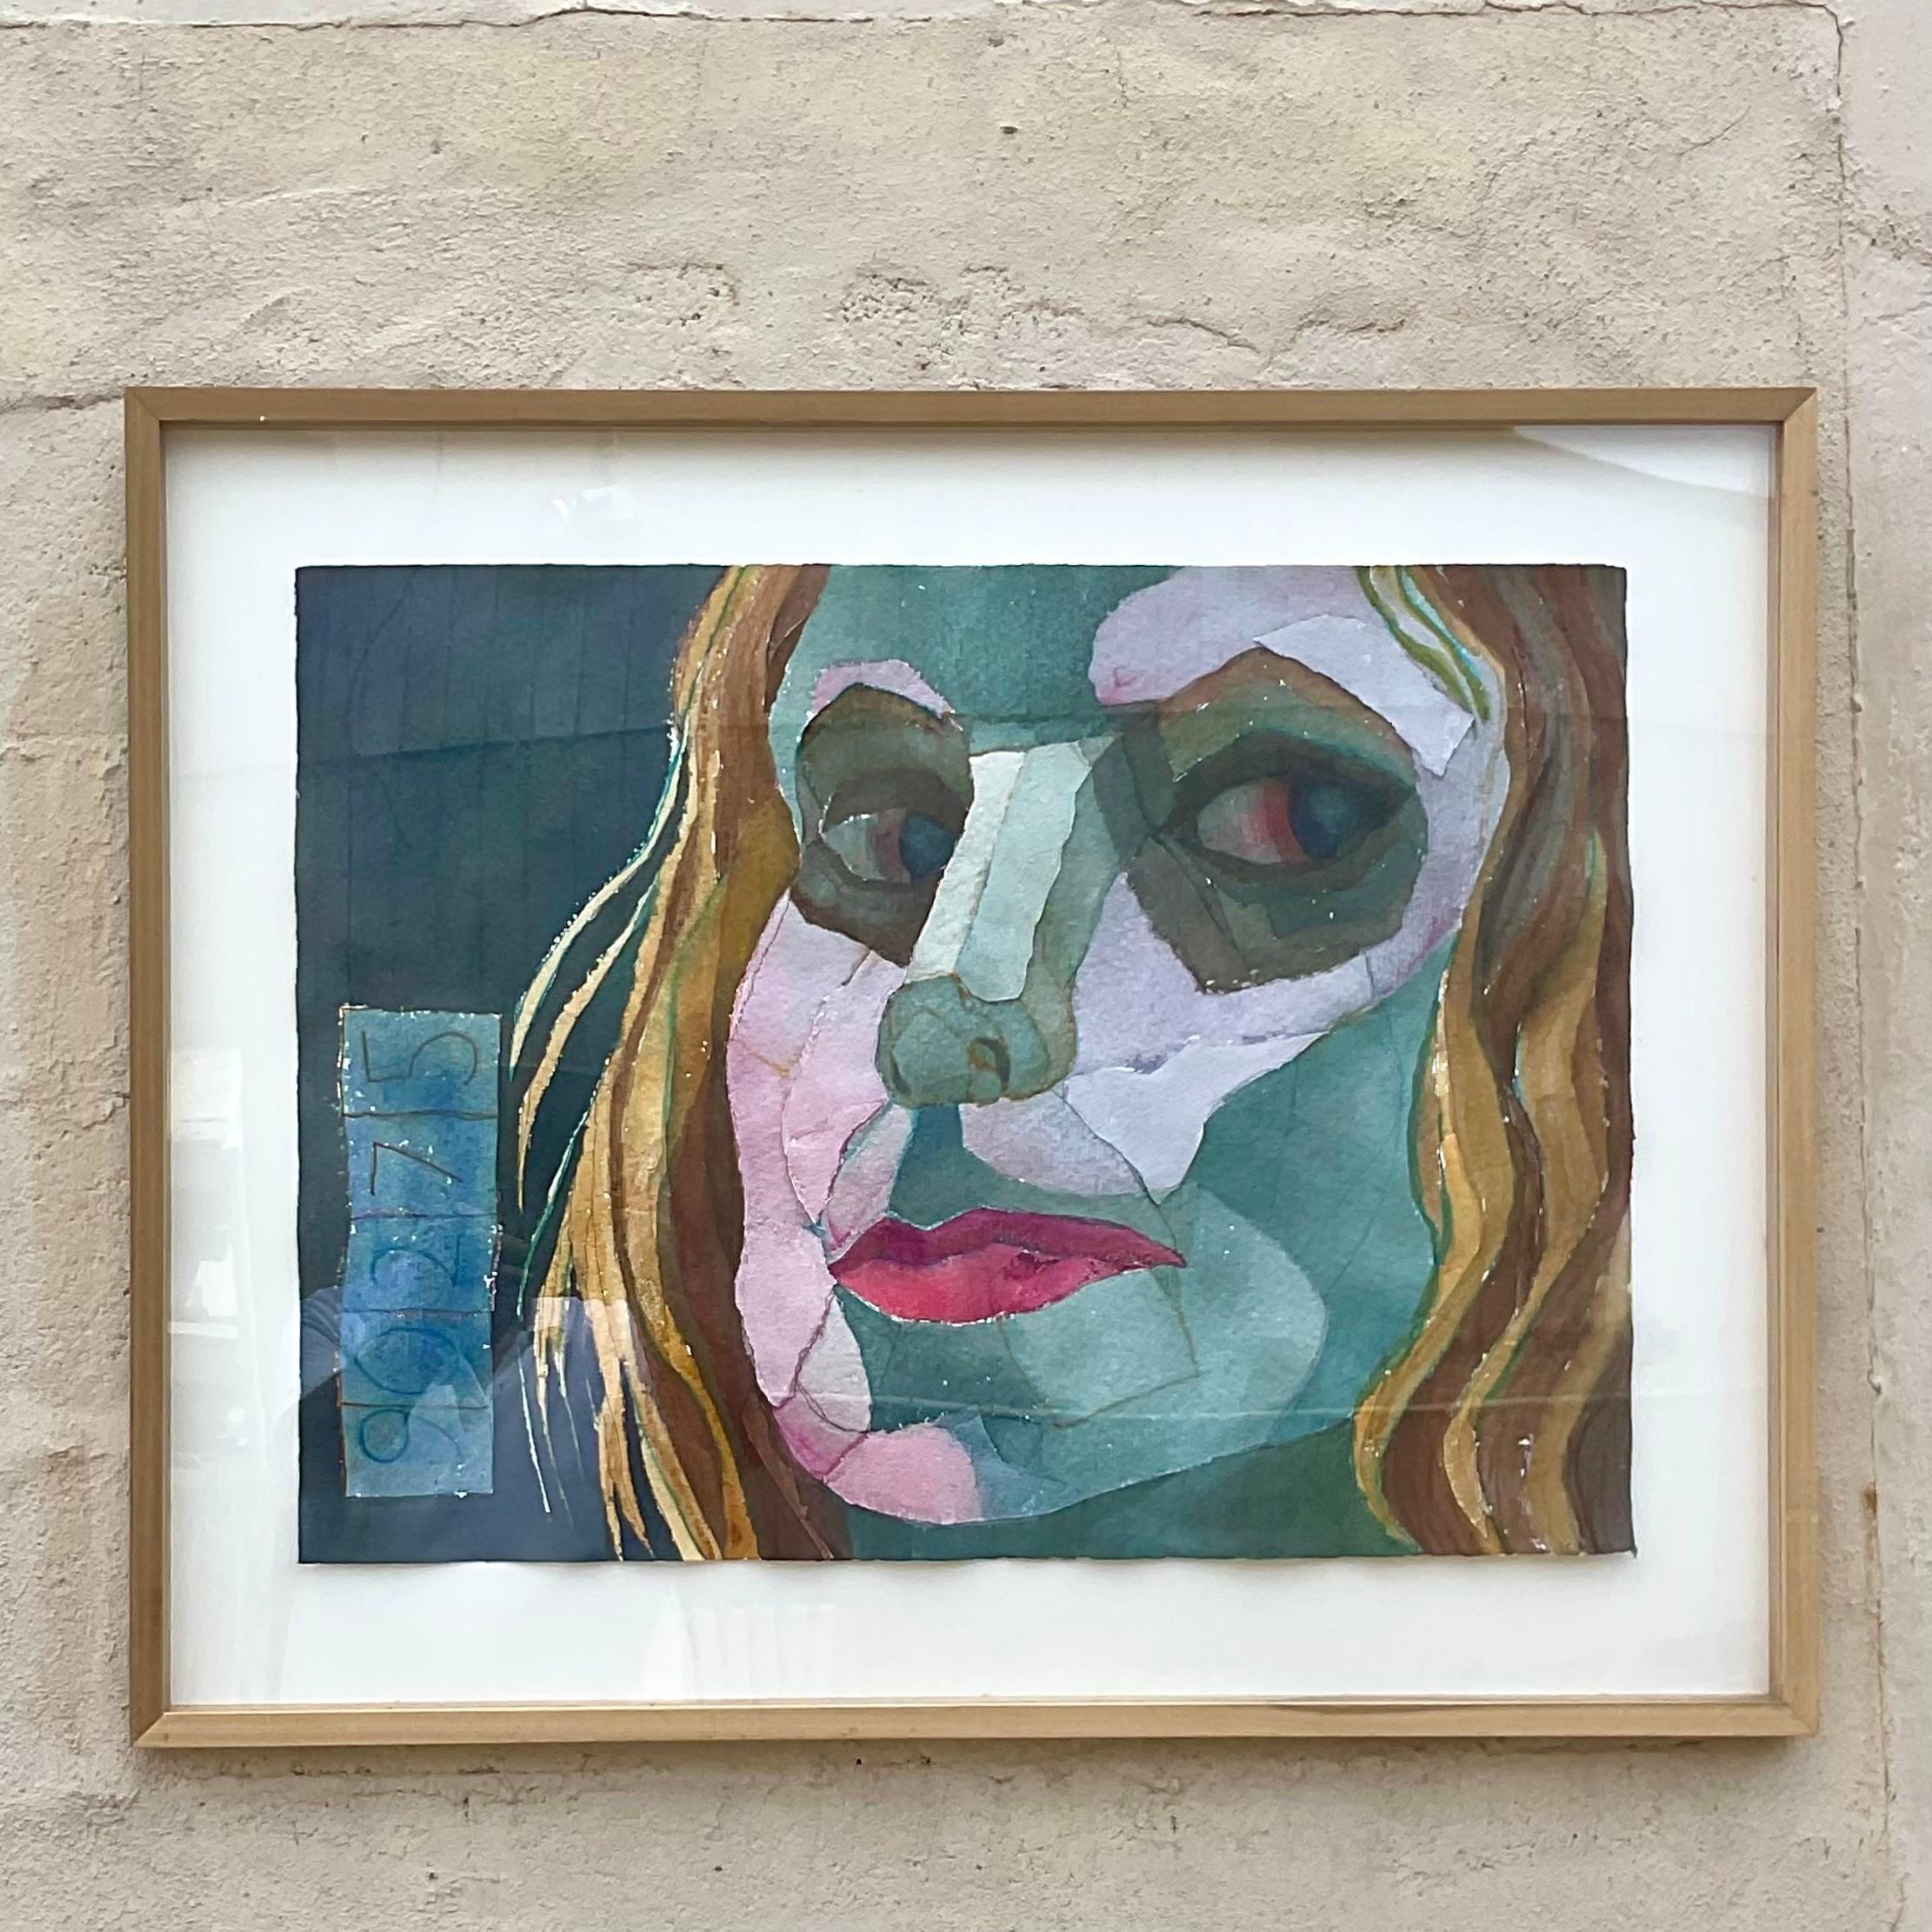 A fantastic vintage Boho original mixed media painting. A stunning portrait done in paints, torn paper and watercolors. Signed by the artist. Acquired from a Palm Beach estate. 